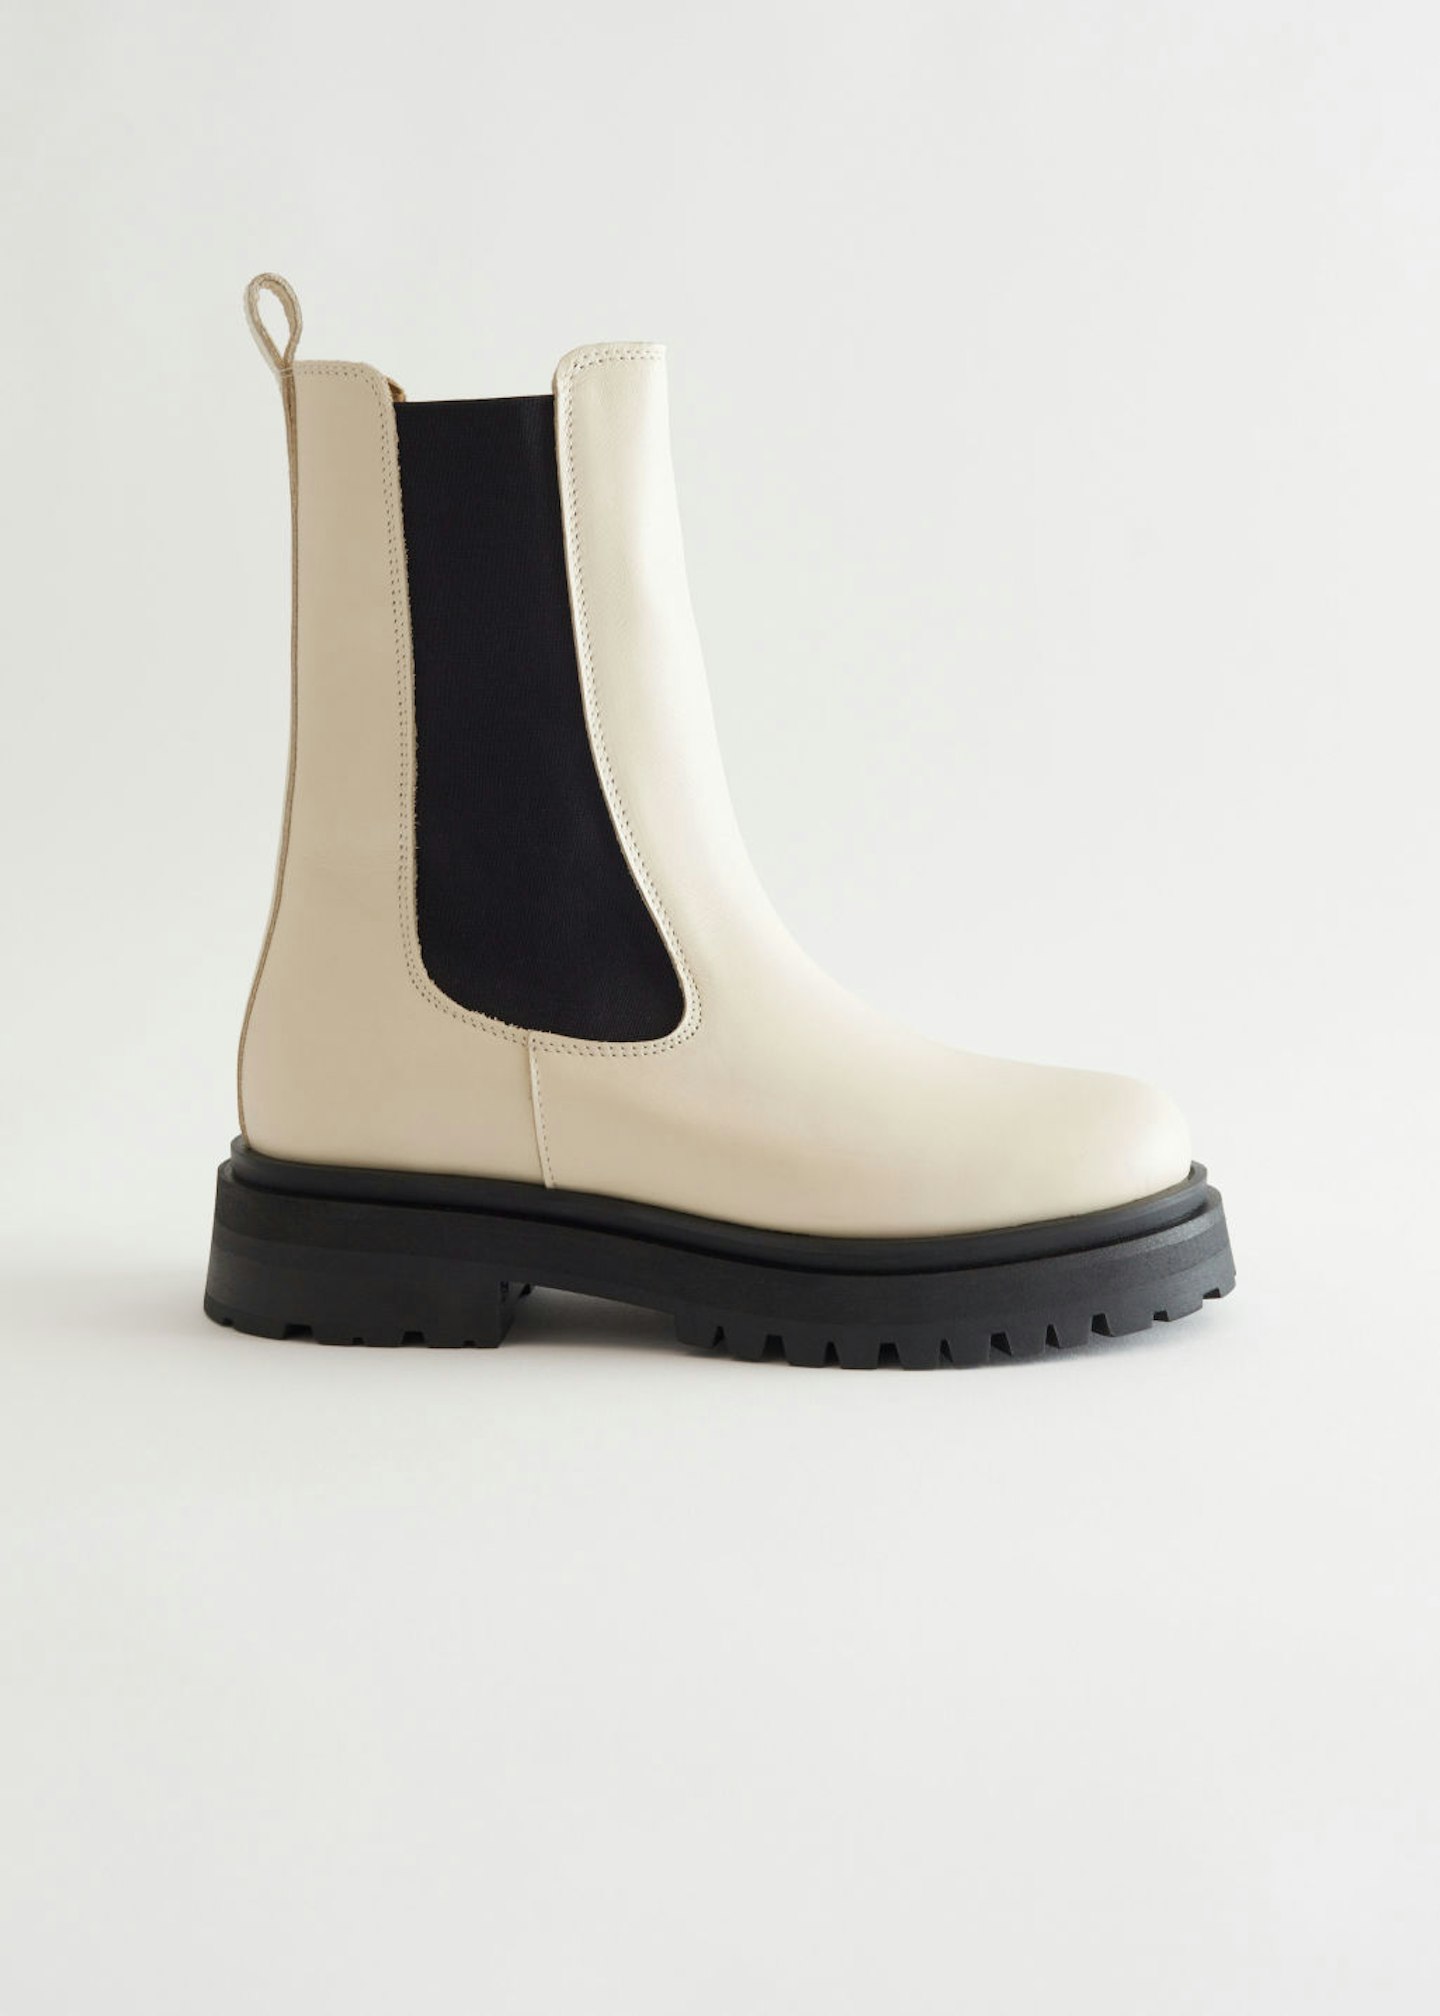 & Other Stories, Chunky Chelsea Leather Boots